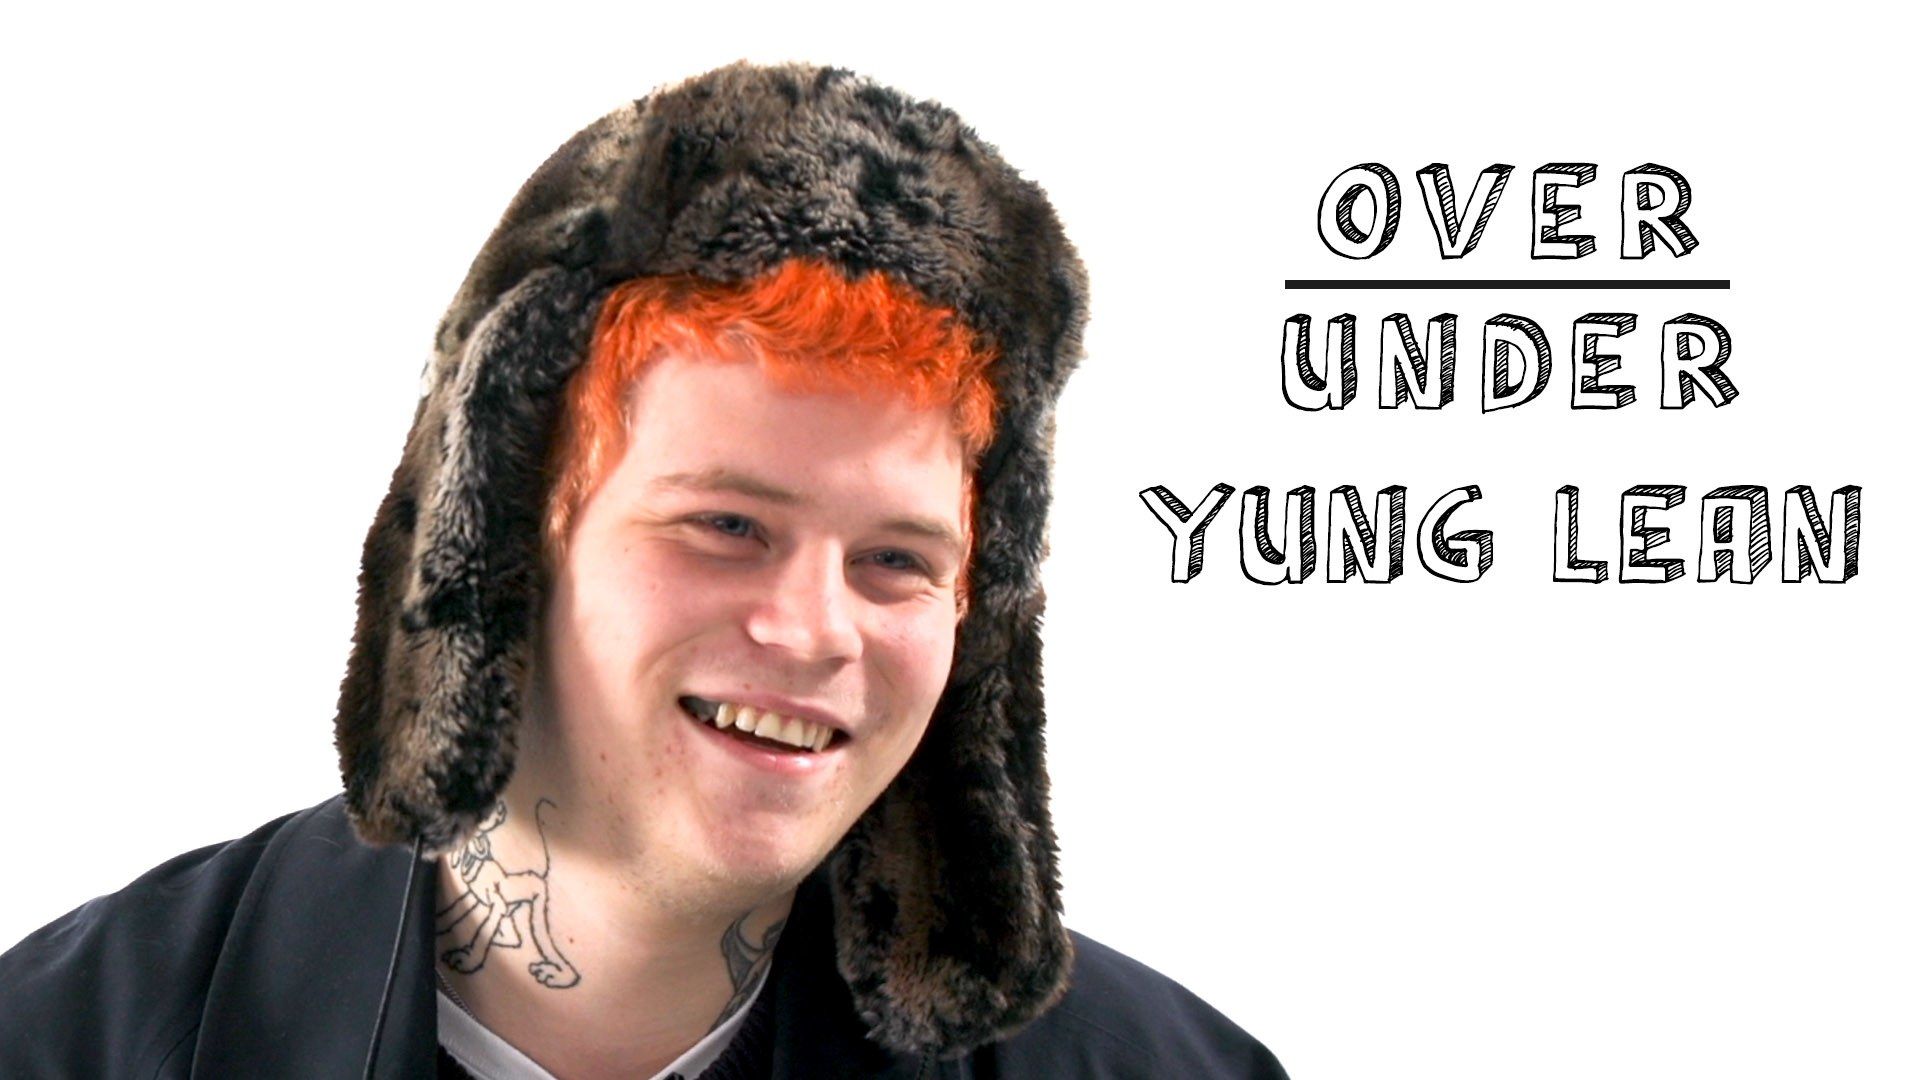 Watch Yung Lean Rate Ikea, Skinny Dipping, And Elon - Yung Lean Over Under - HD Wallpaper 